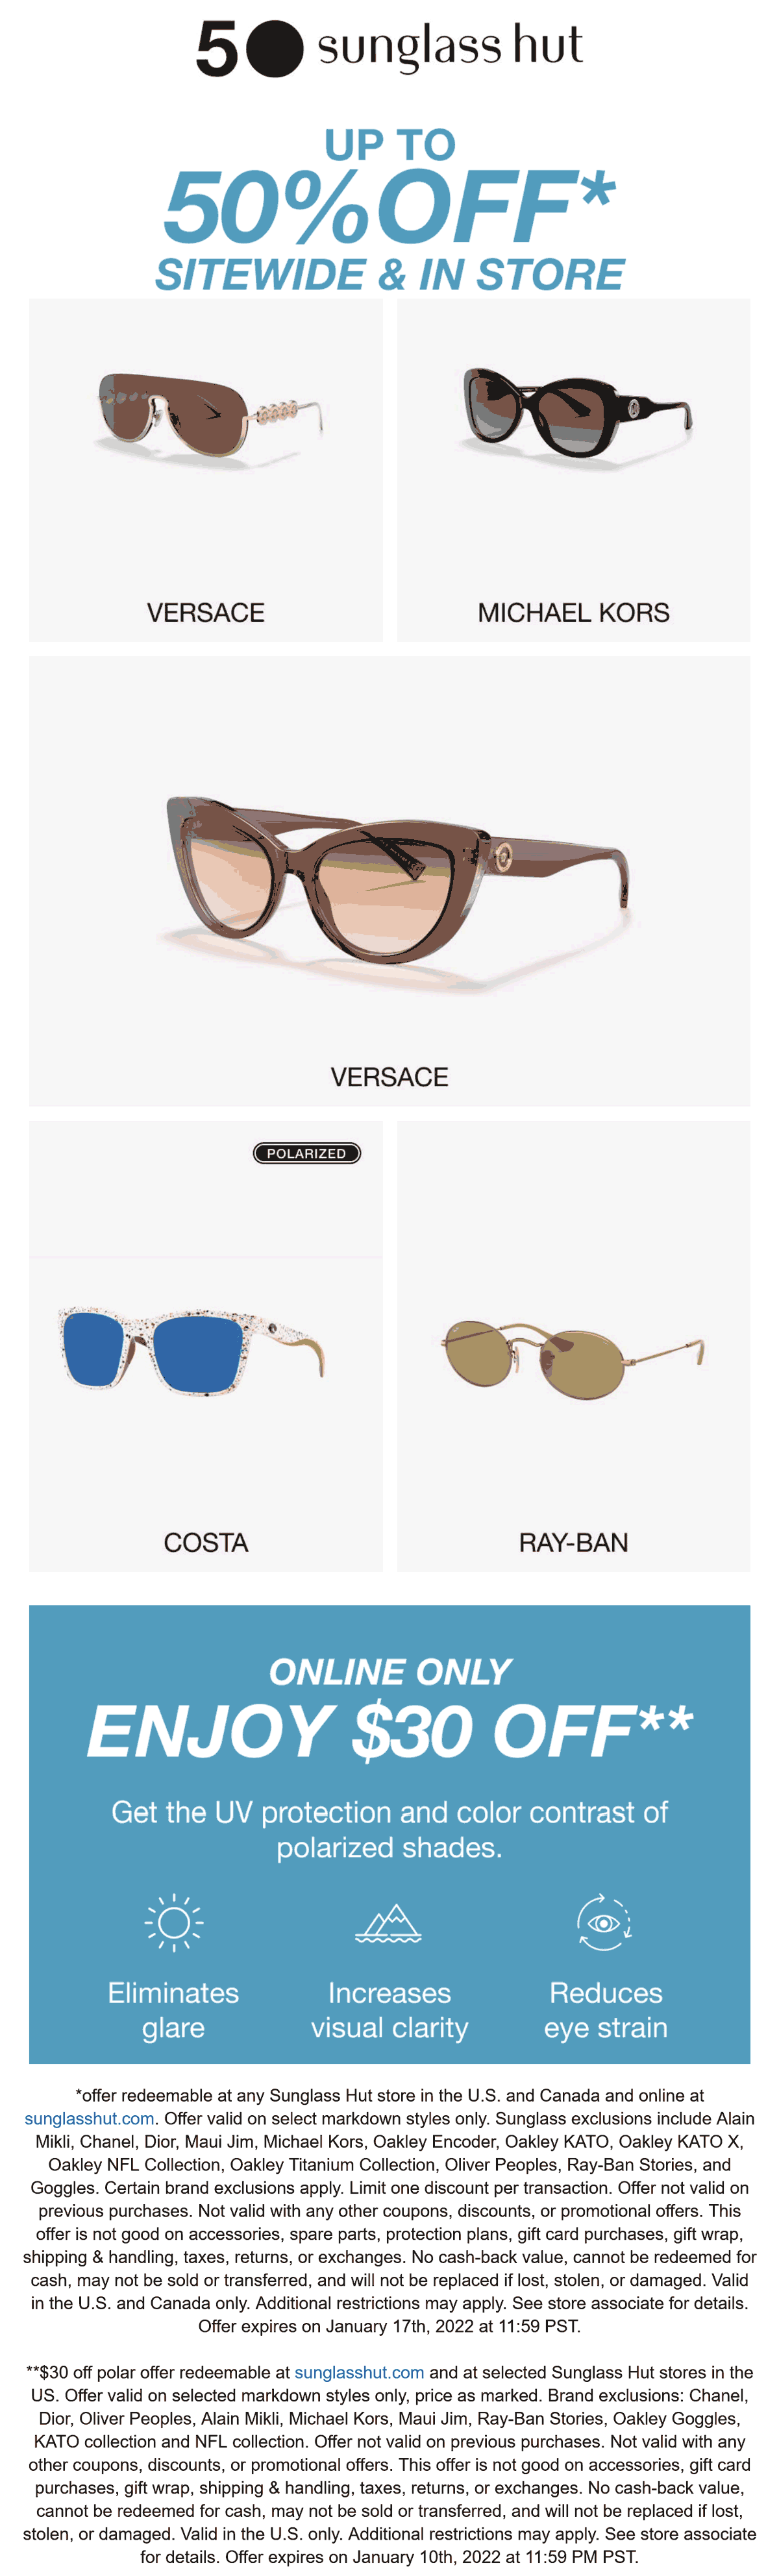 Sunglass Hut stores Coupon  $30 off polarized & more at Sunglass Hut, ditto online #sunglasshut 